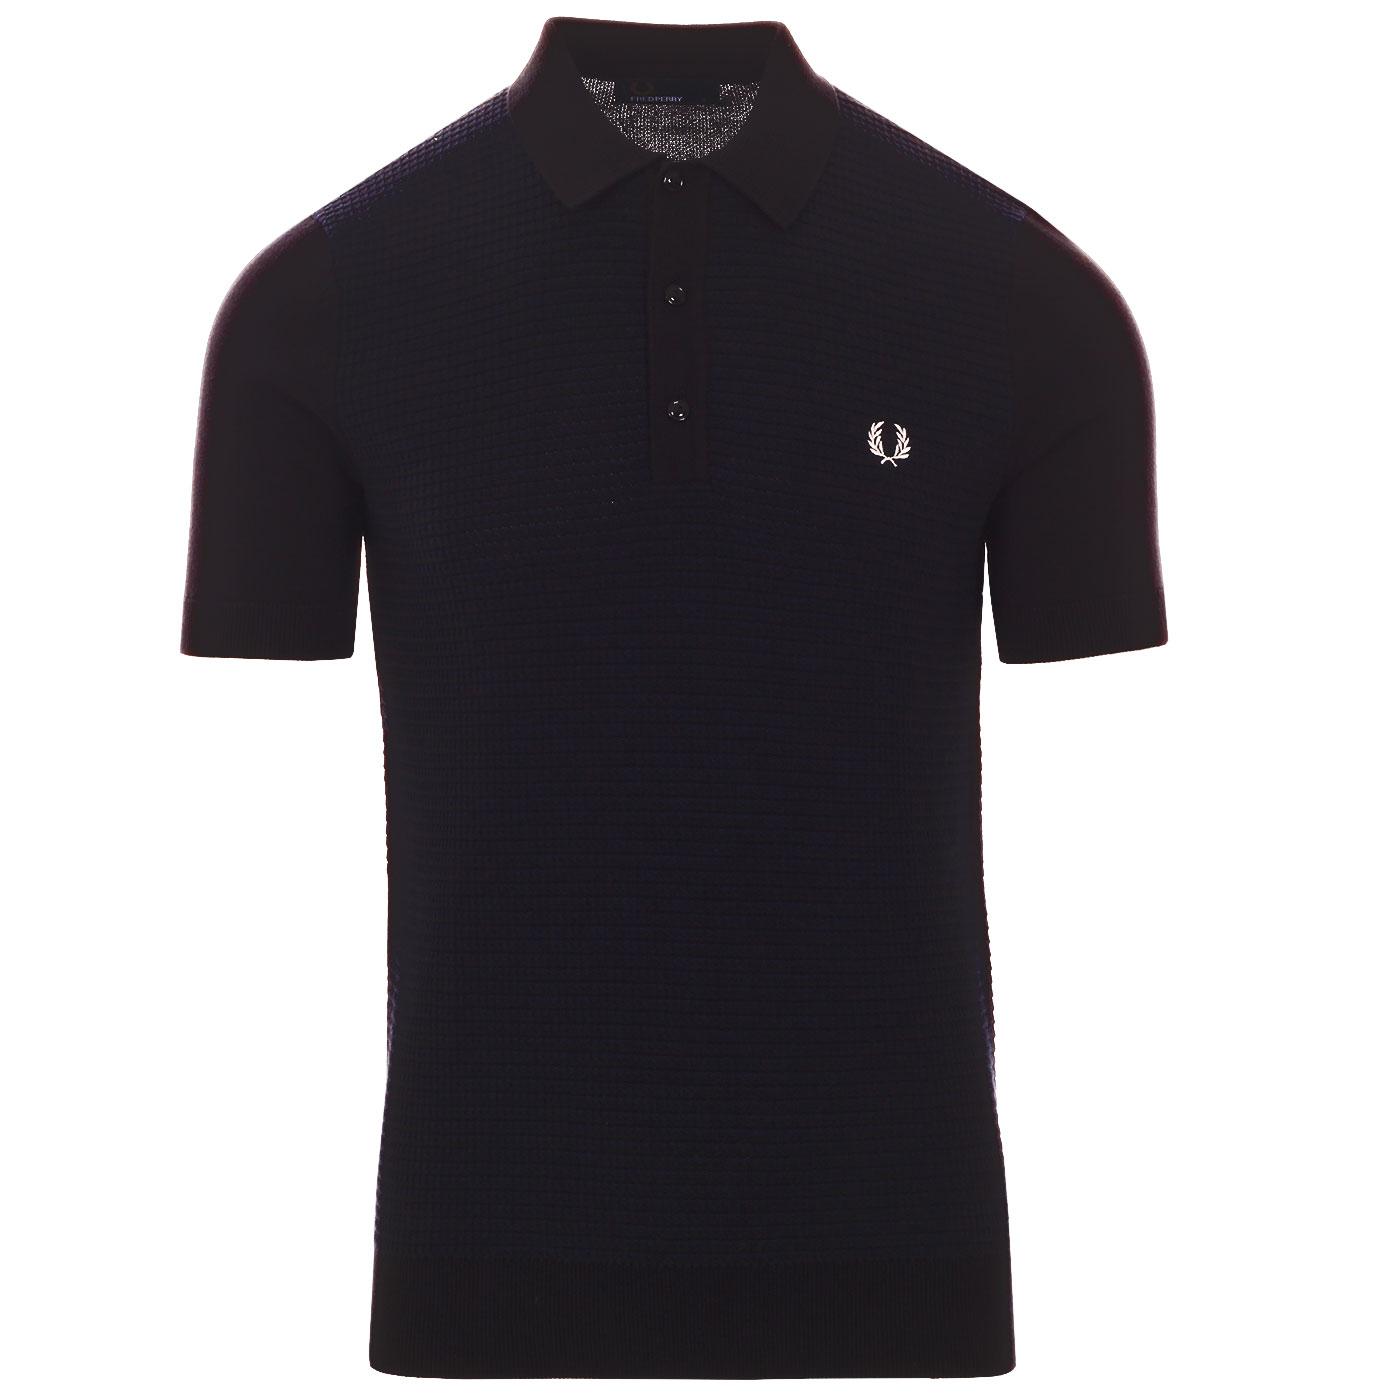 FRED PERRY Retro Mod Textured Tonic Knitted Polo in Black